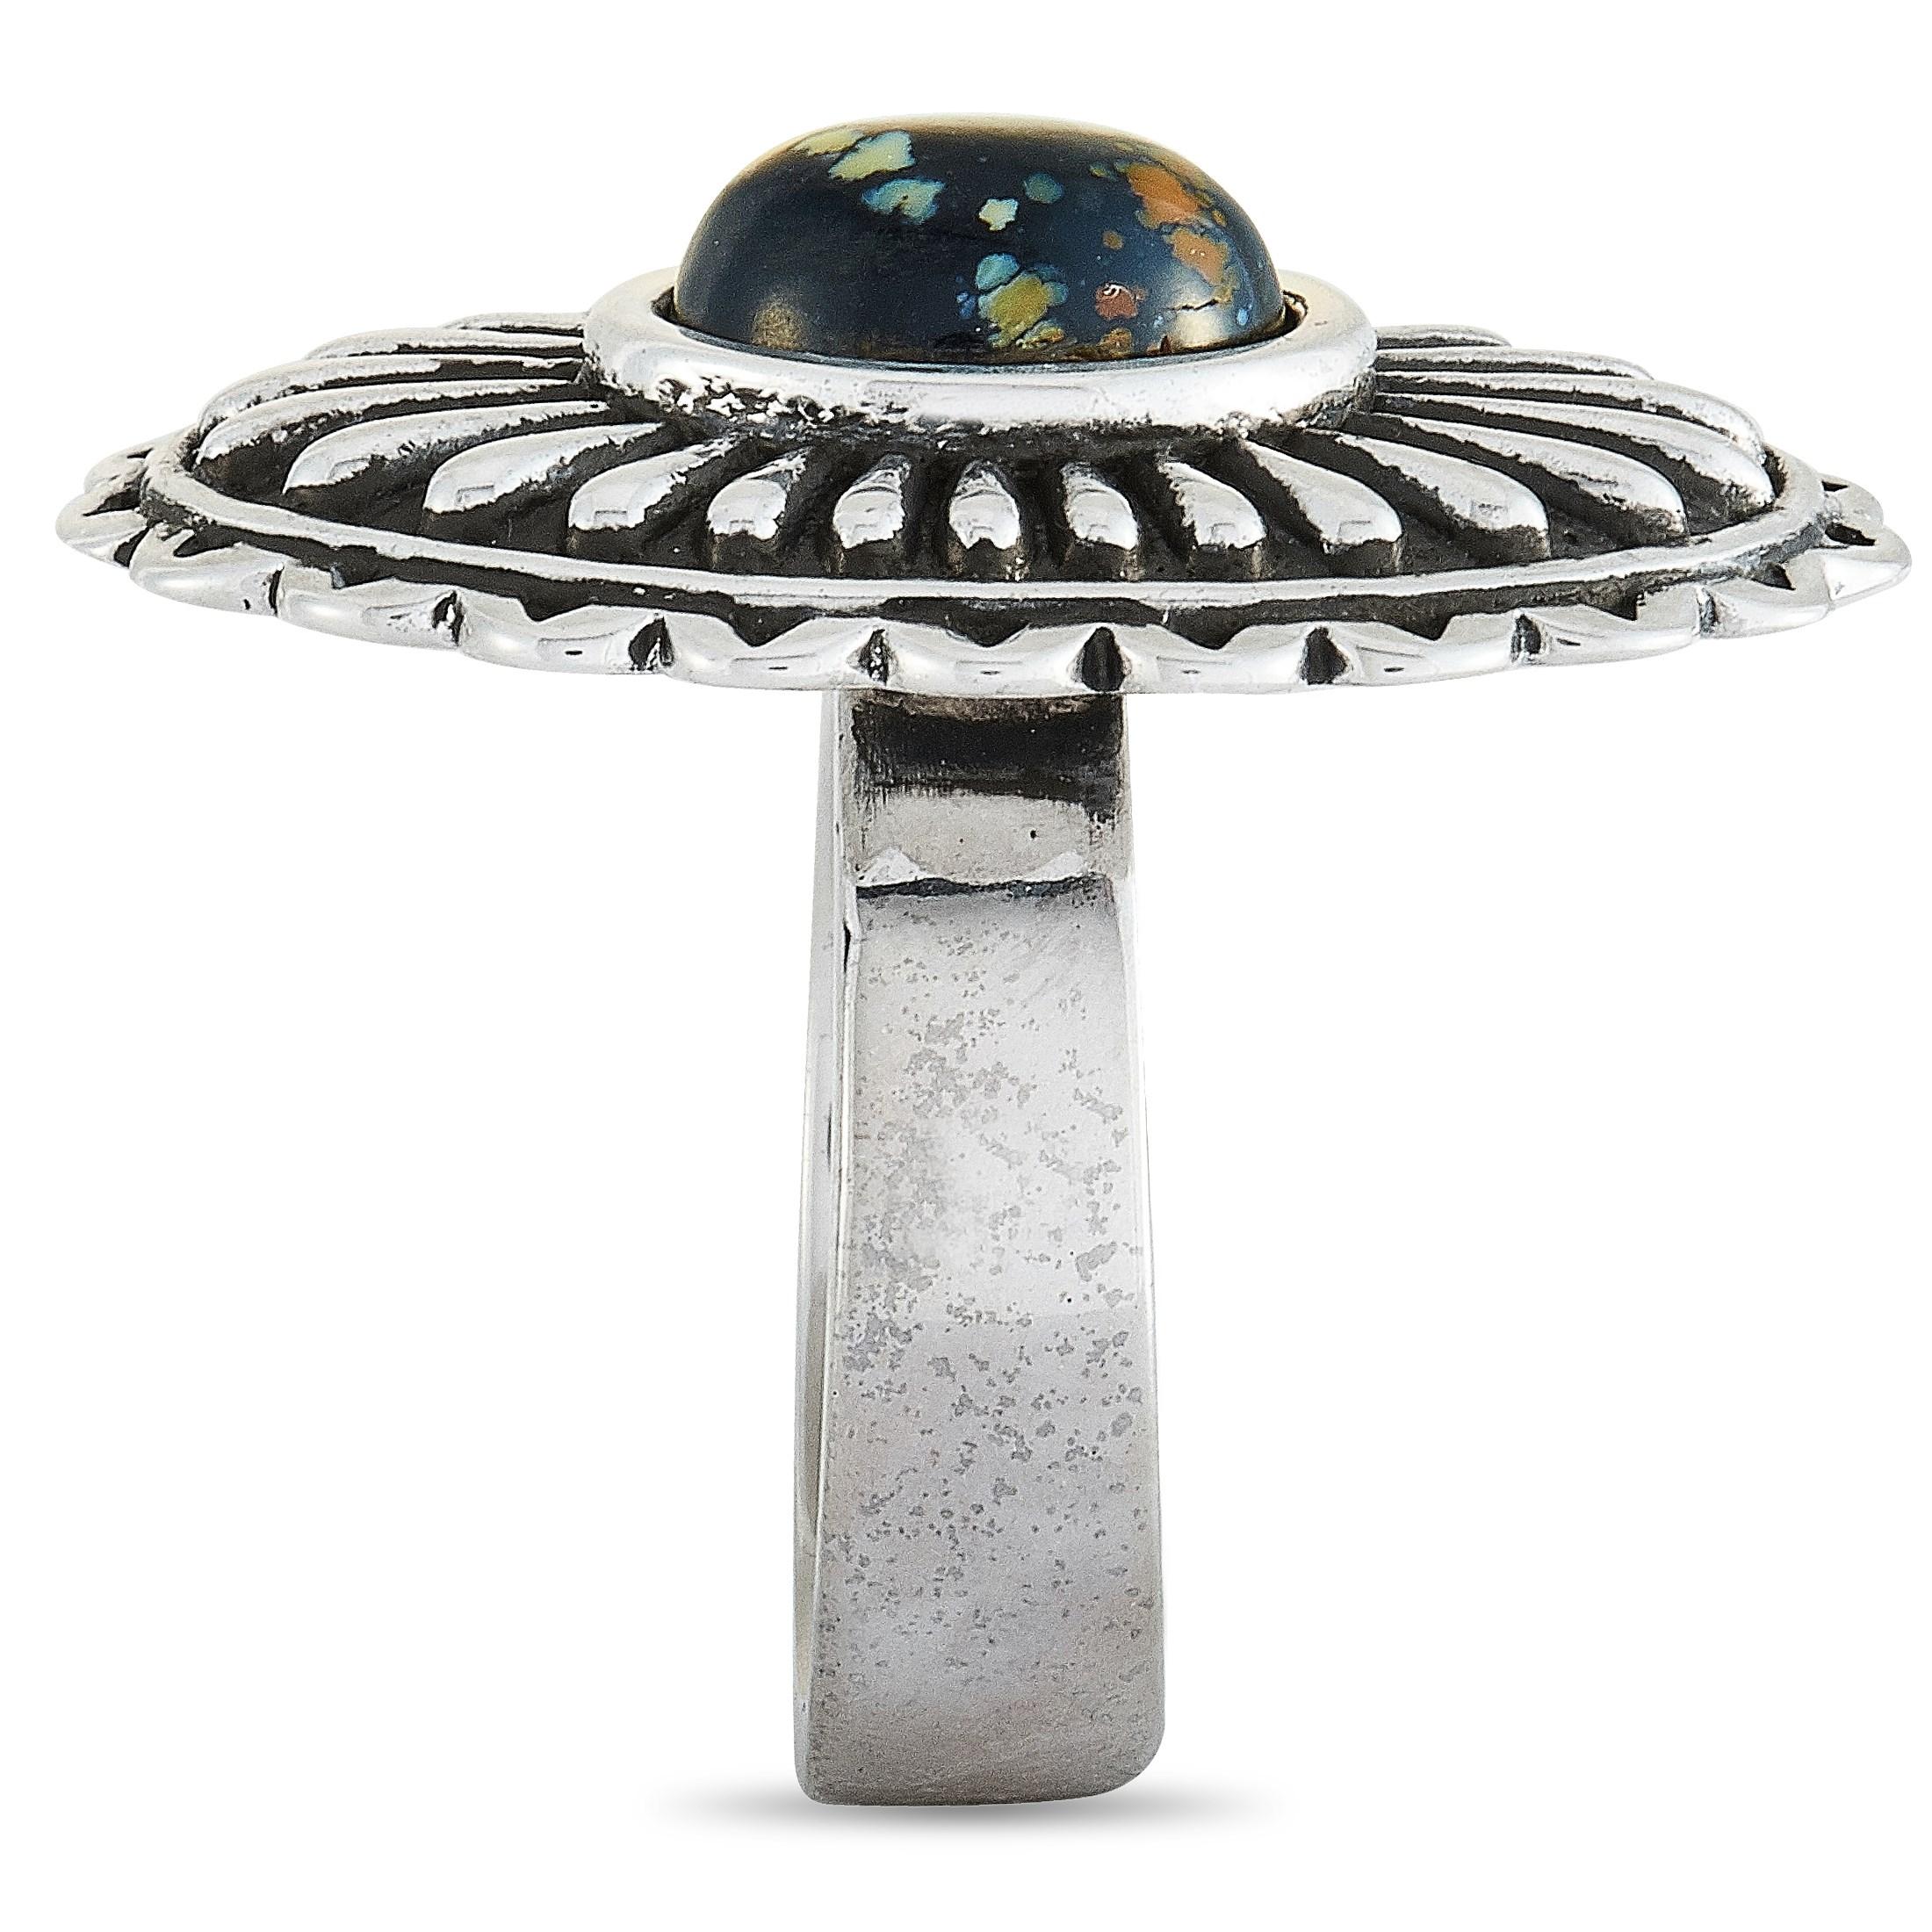 The King Baby “Large Starburst Concho” ring is crafted from silver and set with an 8 by 10 mm spotted turquoise. The ring weighs 17 grams and boasts a band thickness of 6 mm and a top height of 8 mm, while top dimensions measure 21 by 31 mm.

This